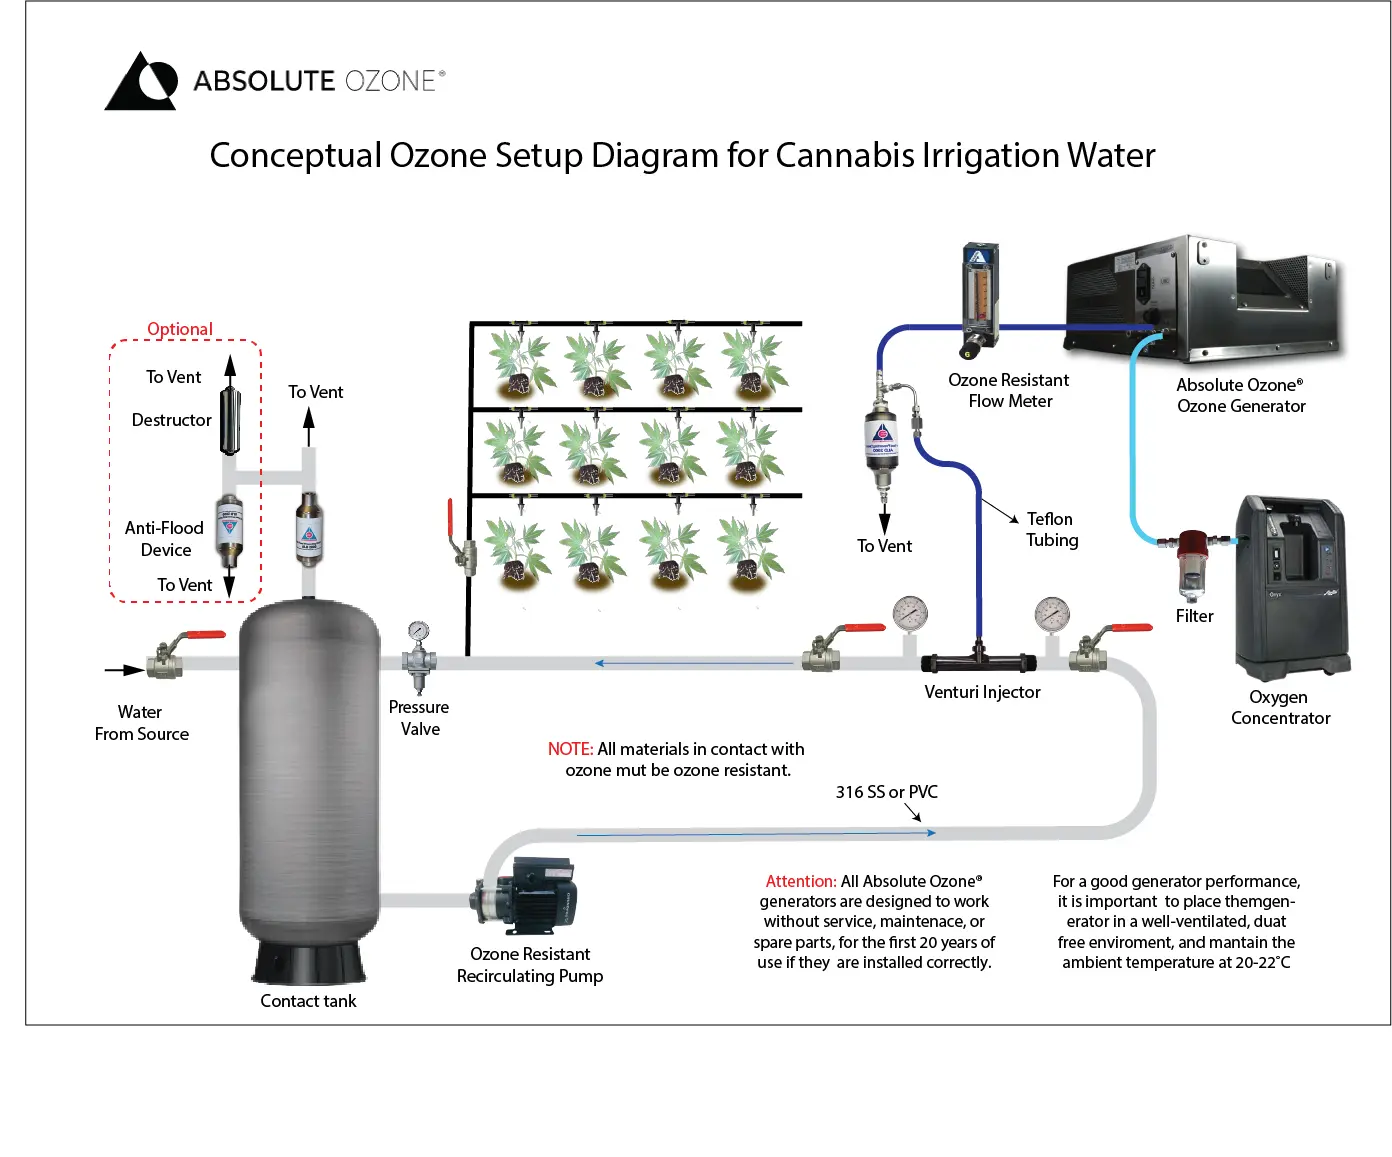 Conceptual Ozone Setup Diagram for Cannabis Irrigation Water